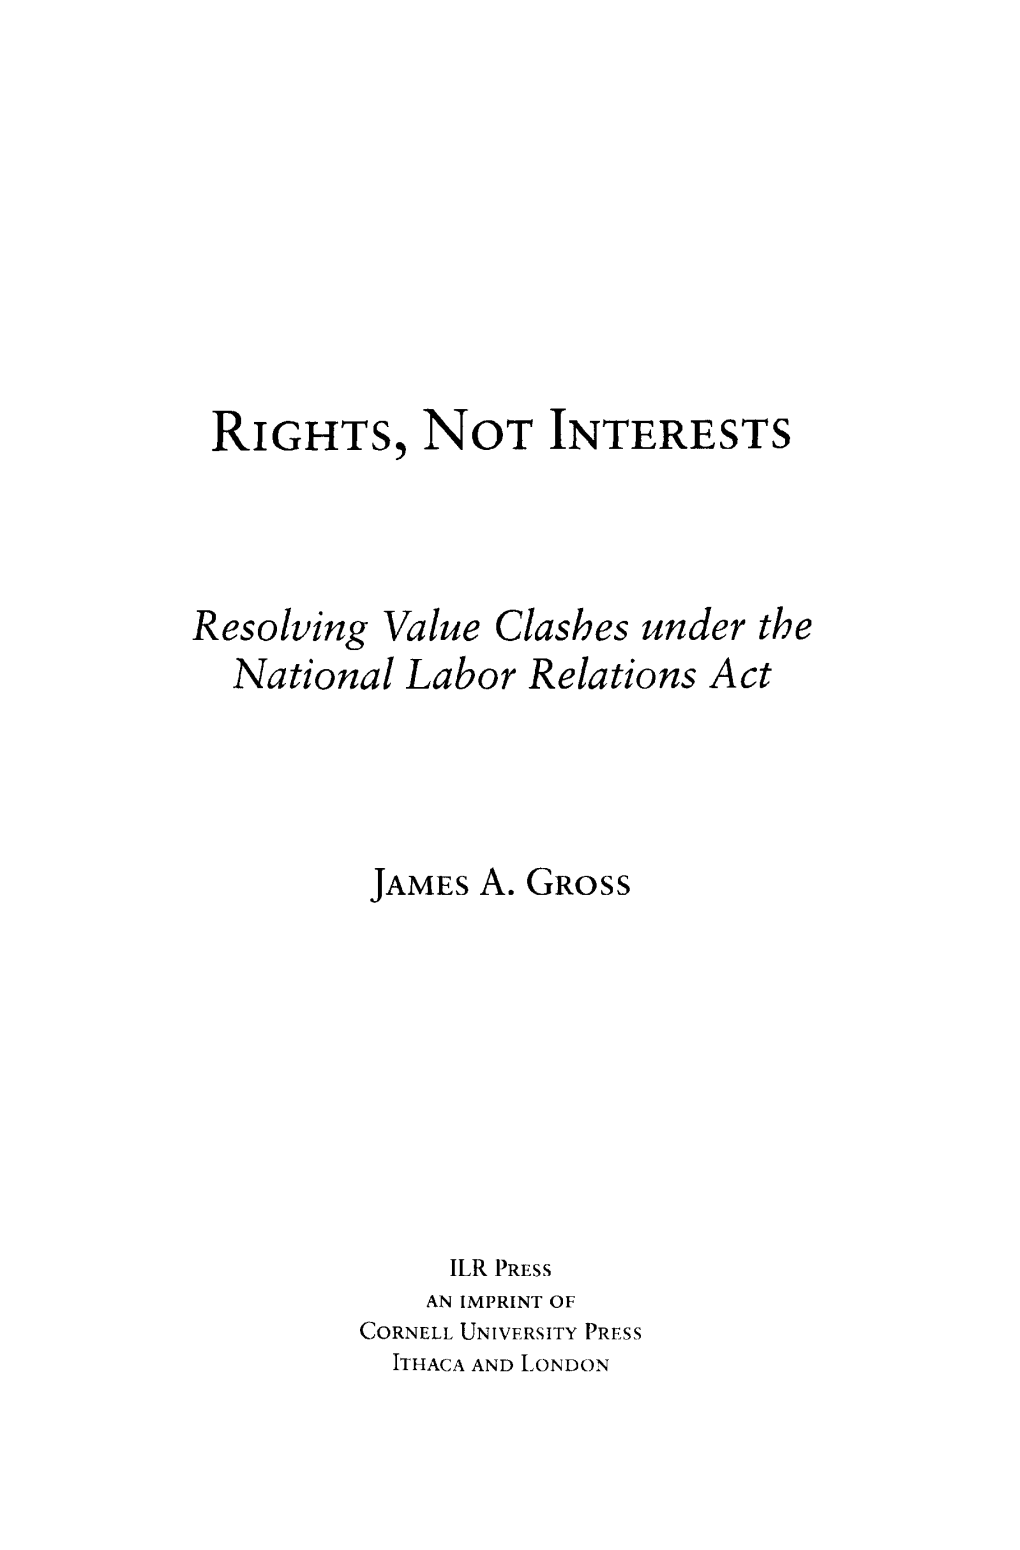 Resolving Value Clashes Under the National Labor Relations Act